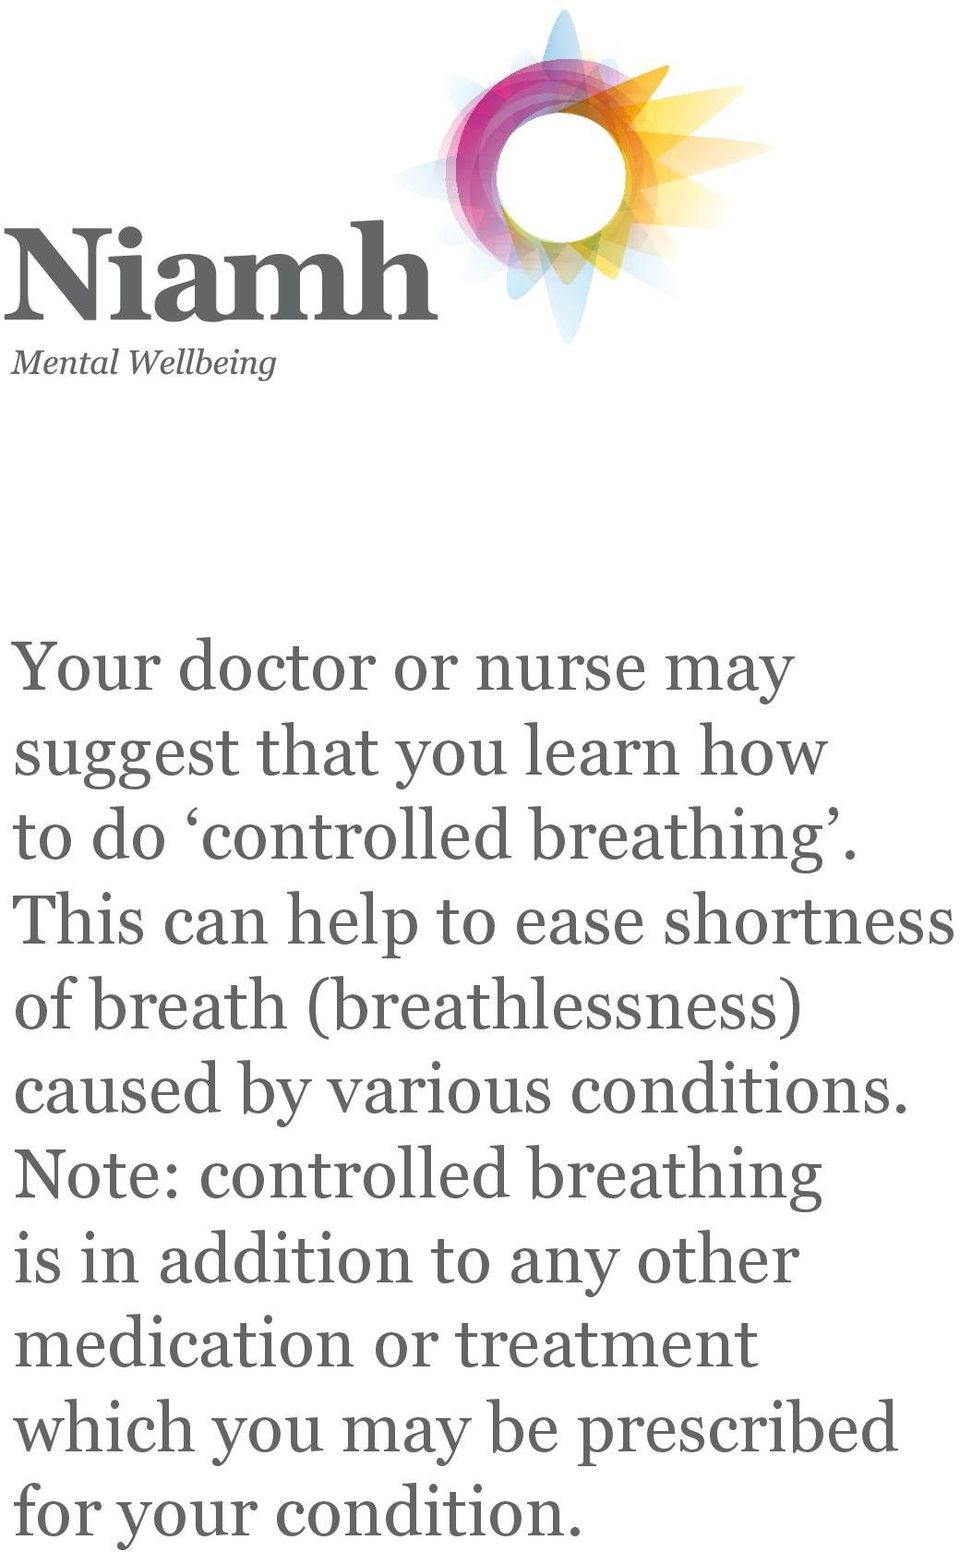 This can help to ease shortness of breath (breathlessness) caused by